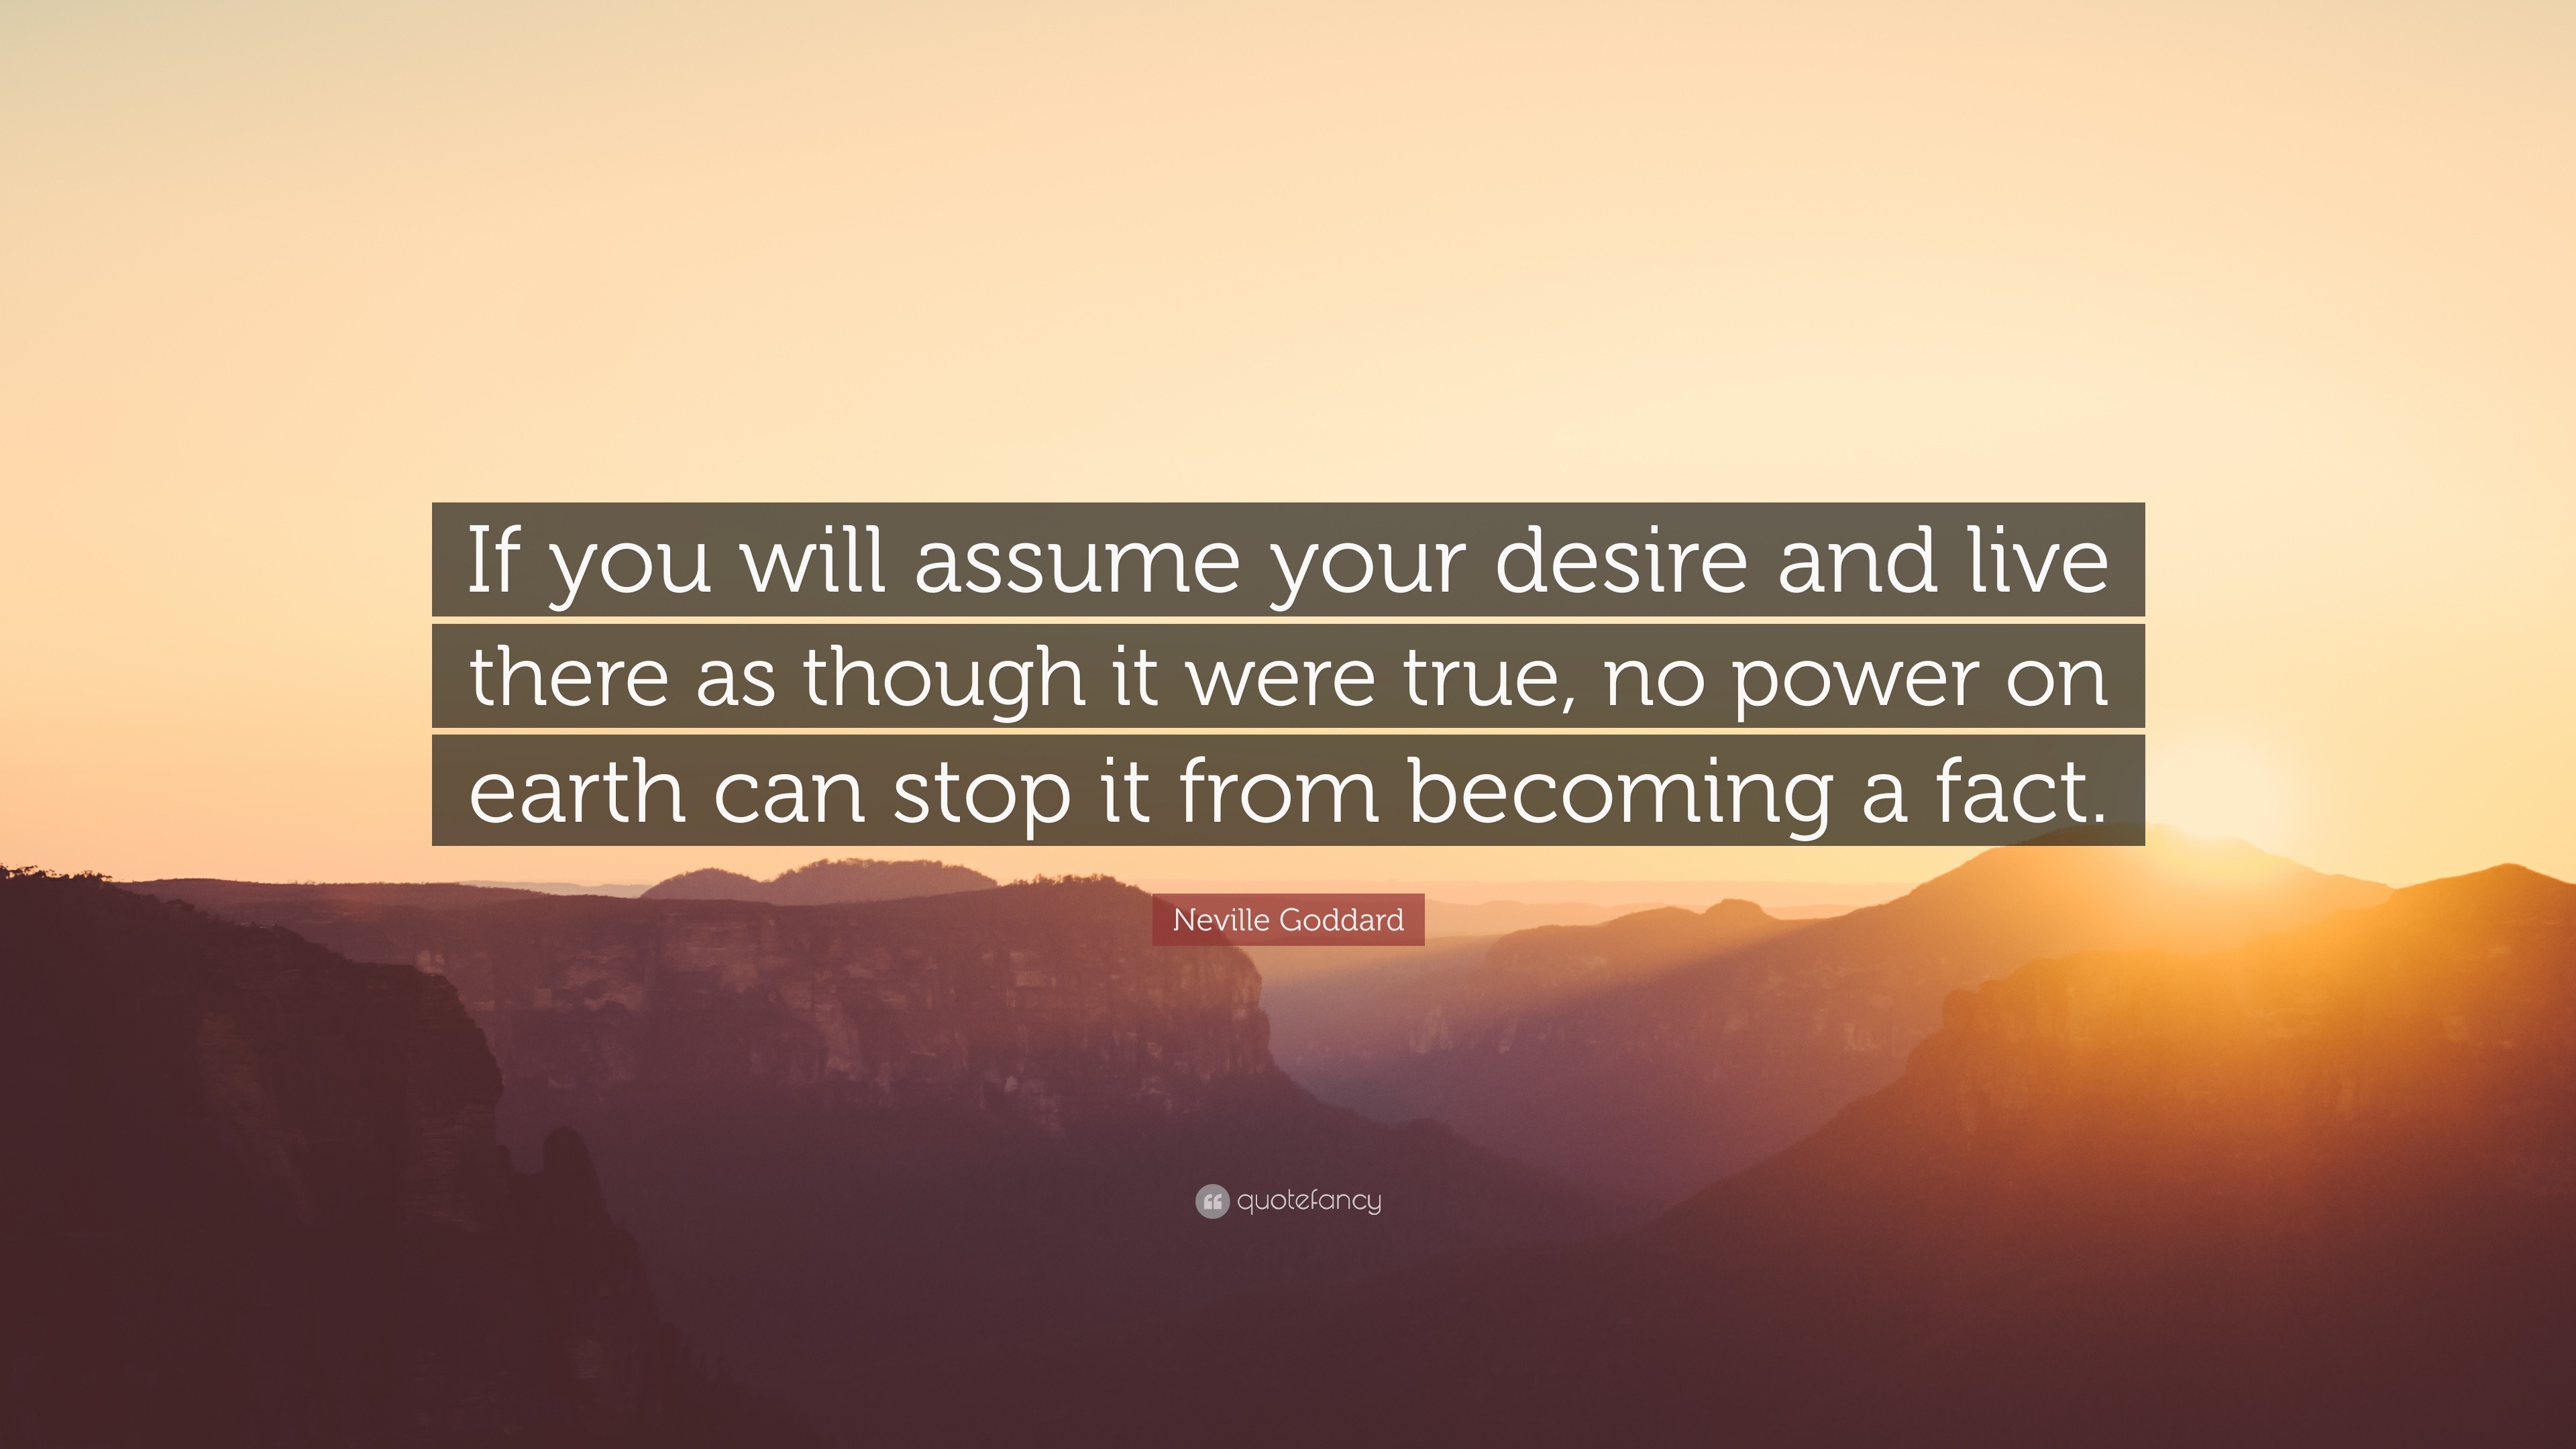 Neville Goddard Quote: “If you will assume your desire and live there as  though it were true, no power on earth can stop it from becoming a fact...”